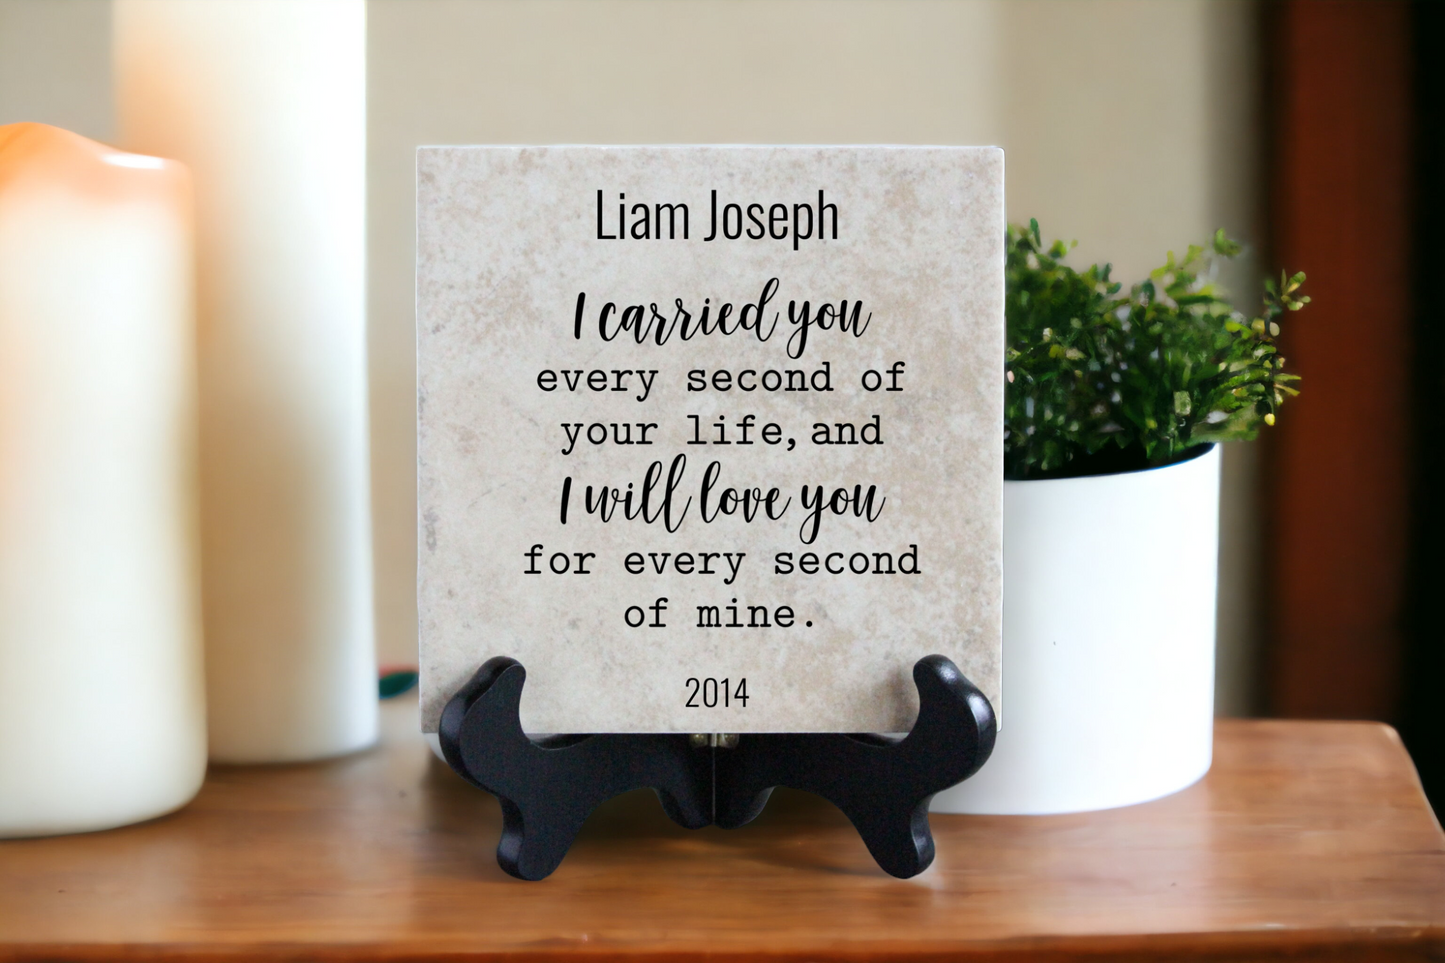 I Carried You Every Second of Your Life Memorial Tile